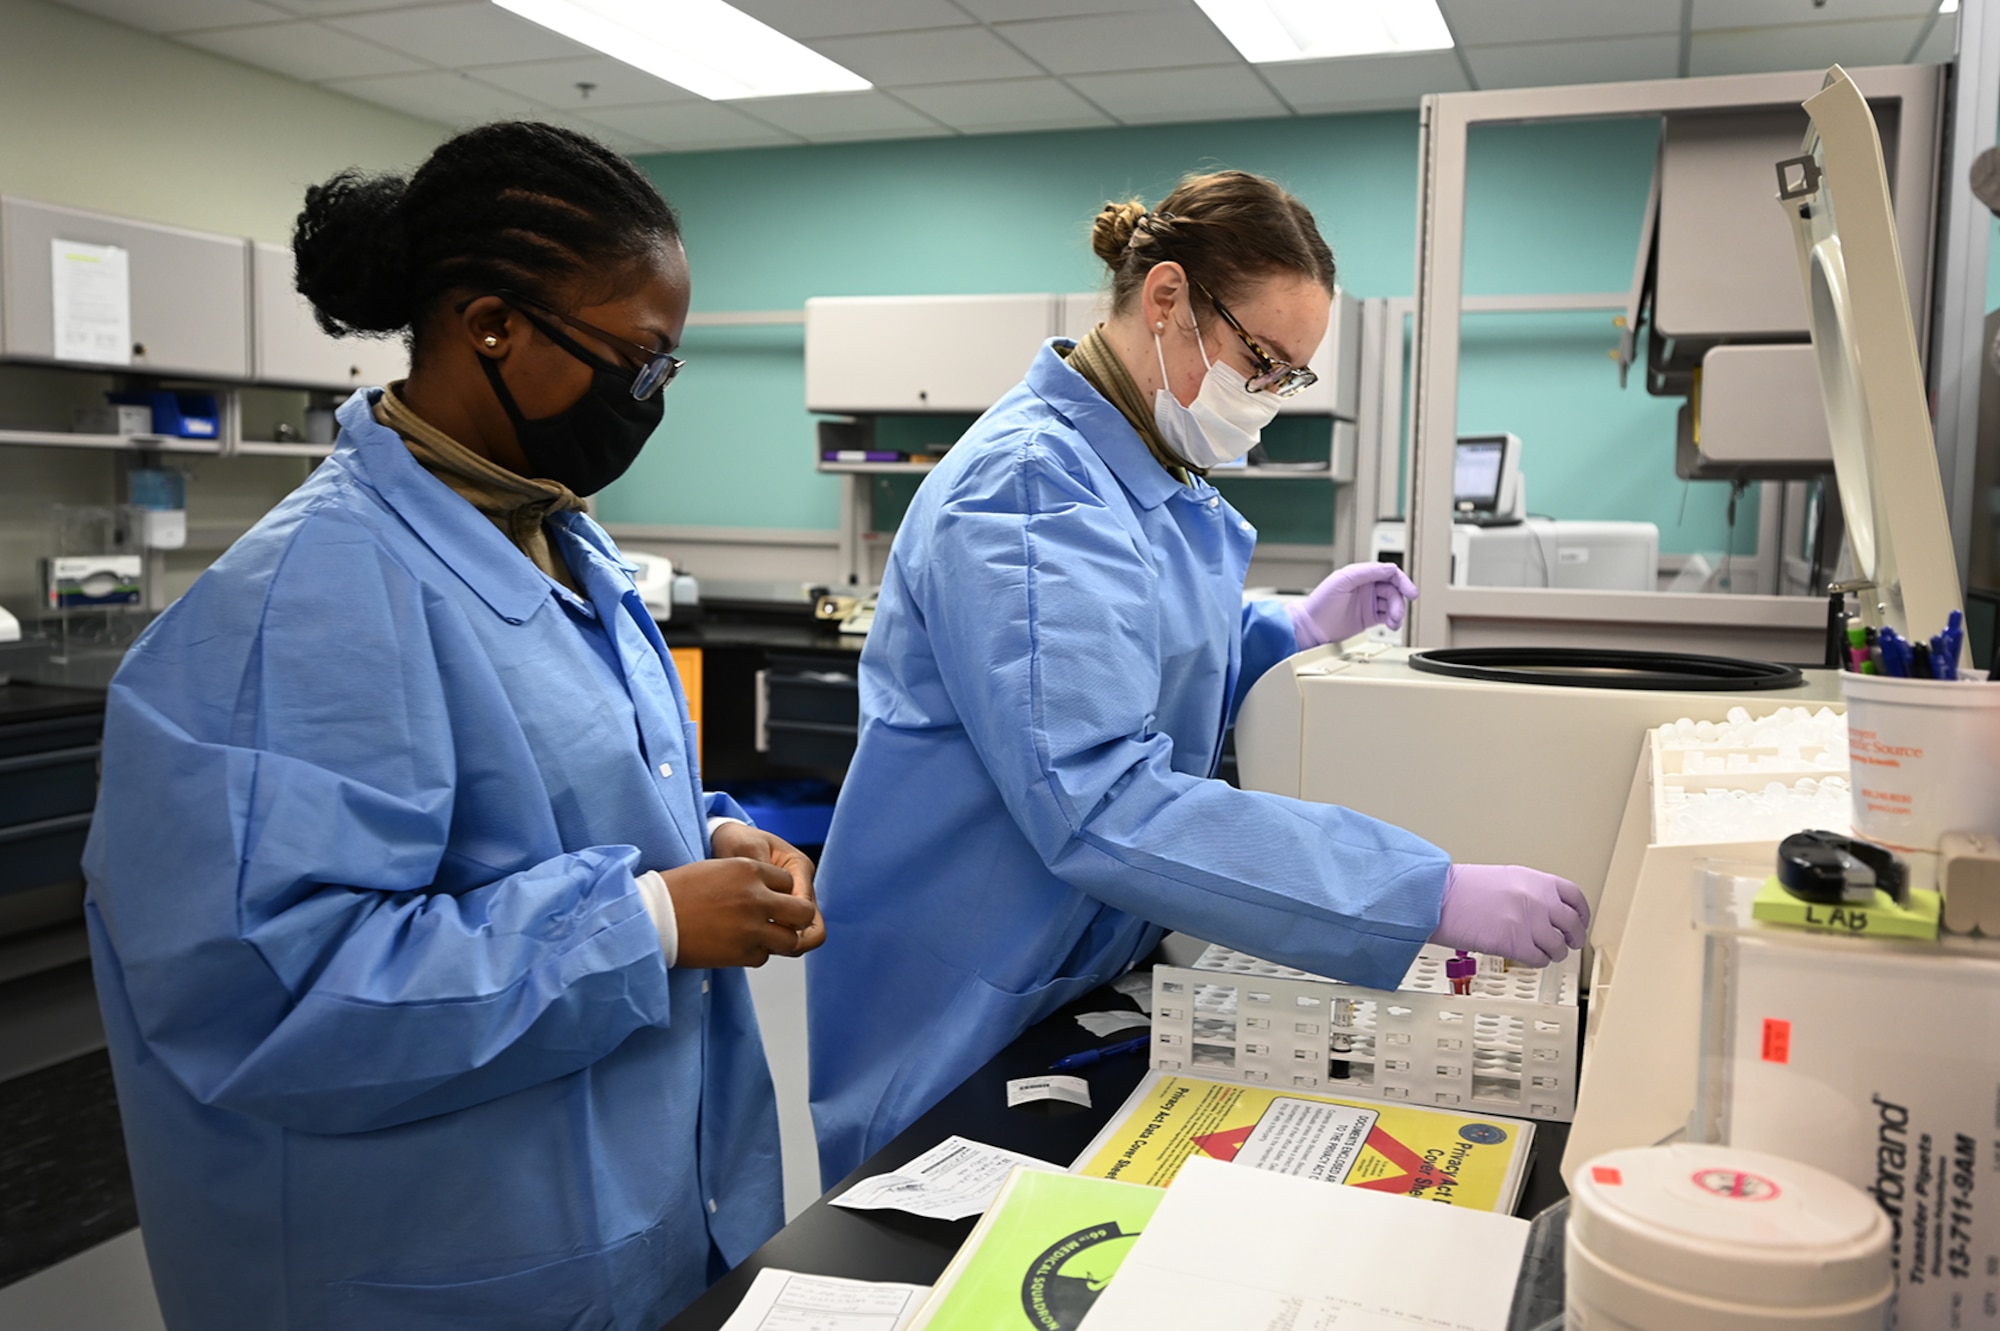 Senior Airman Arienthea Gray and Airman 1st Class Kaylin Rice, 66th Medical Squadron Laboratory technicians, record lab work results at the medical laboratory at Hanscom Air Force Base, Mass., Dec. 3. Laboratory technicians are responsible for collecting and testing all routine lab work and COVID tests done on the installation. (U.S. Air Force photo by Todd Maki)